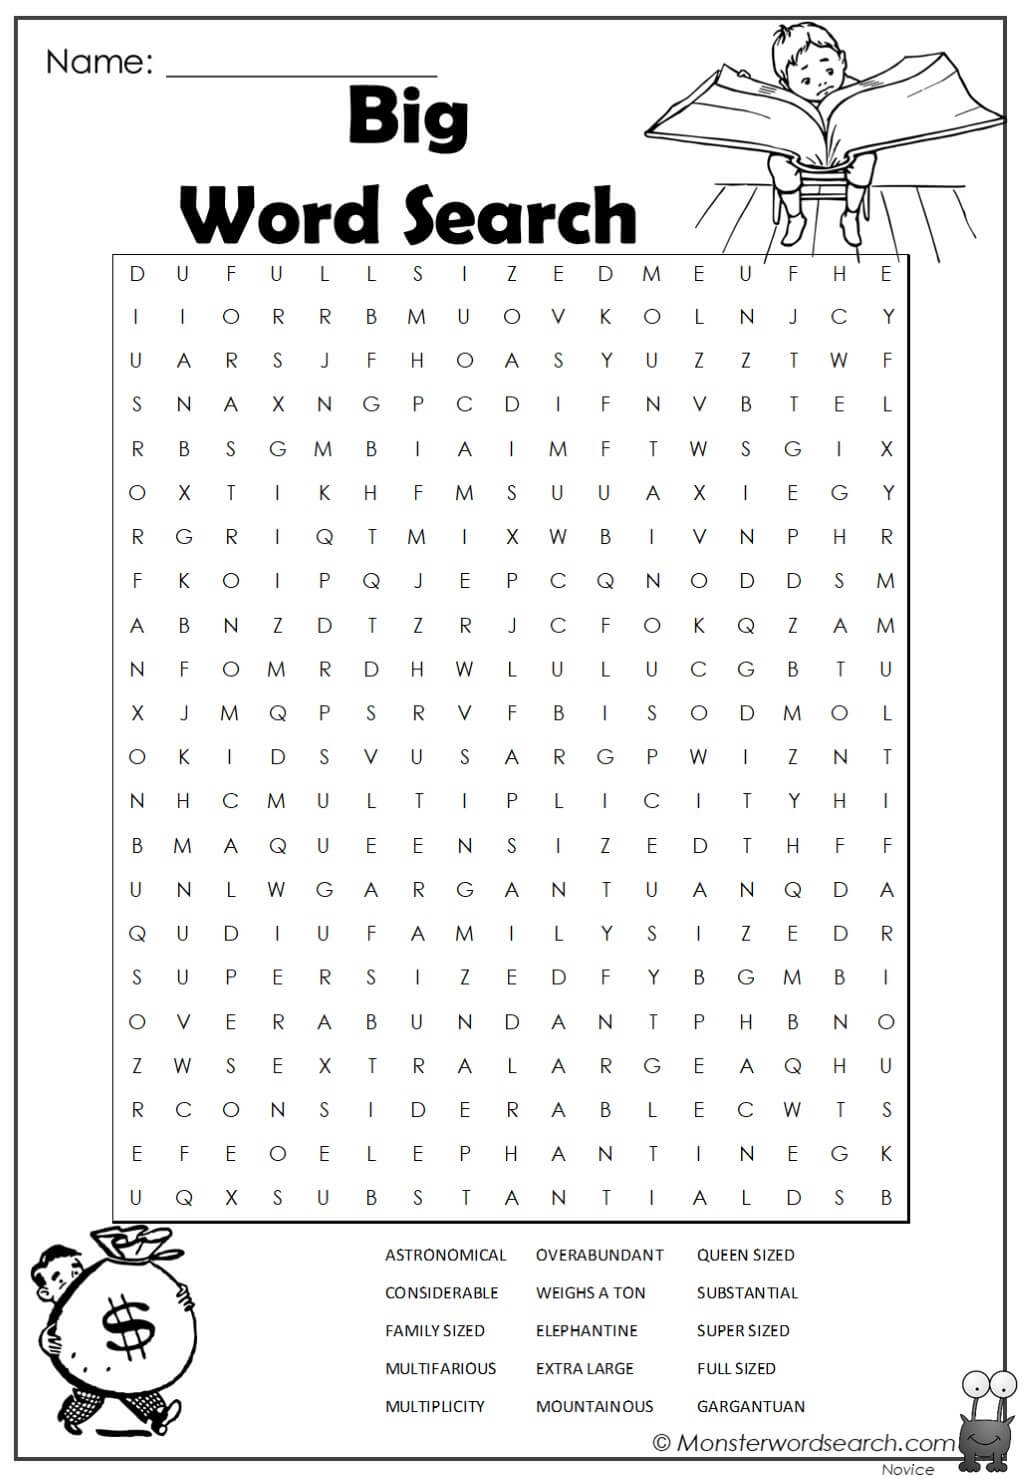 trees-word-search